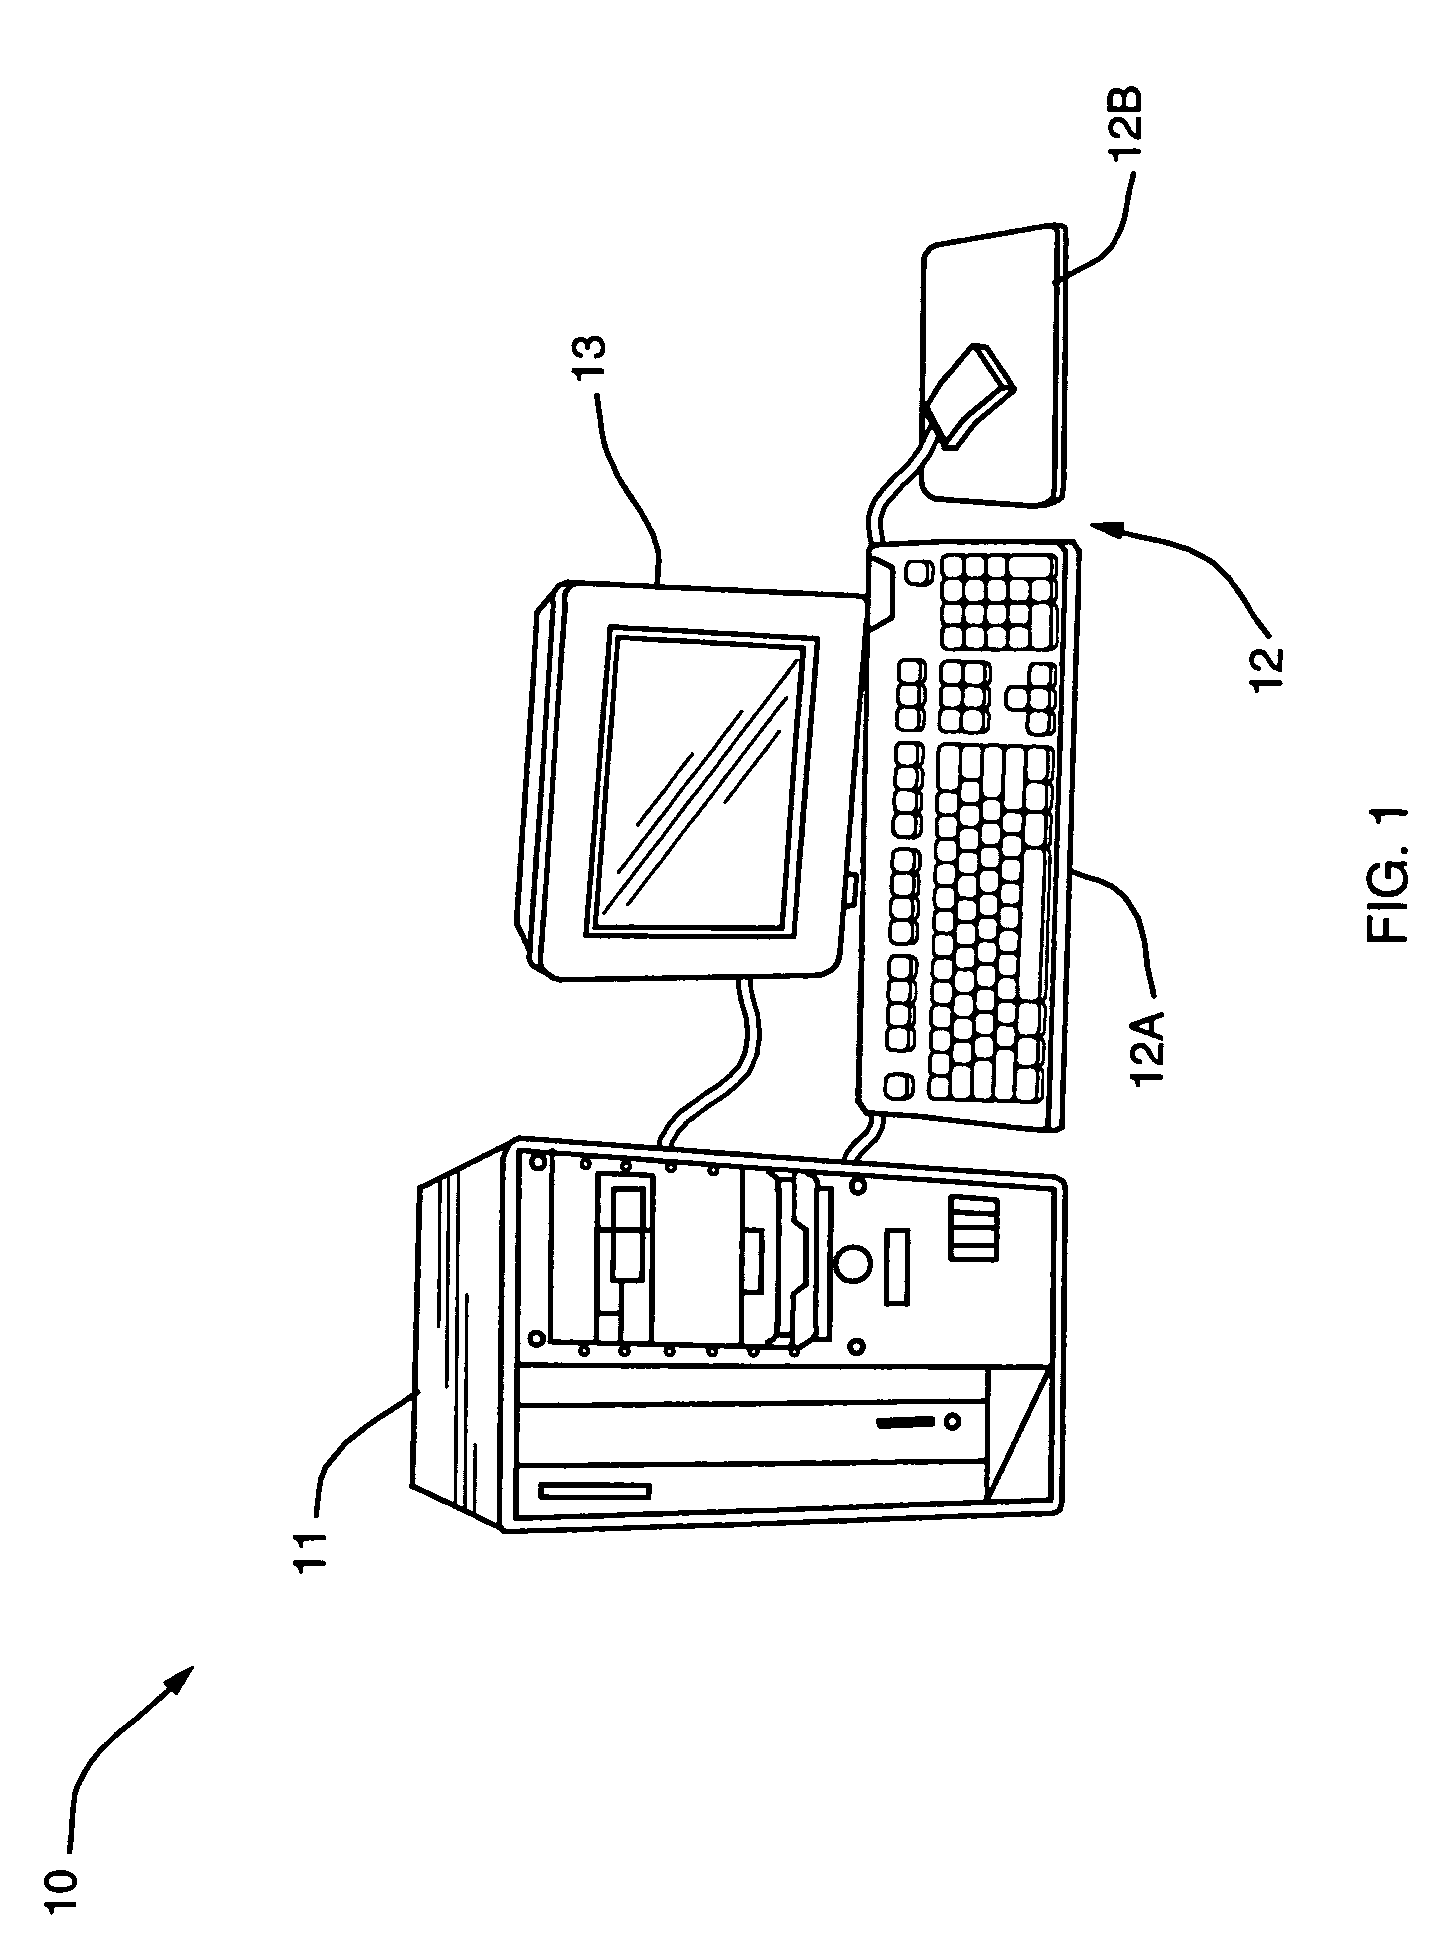 System and method for assessing the effectiveness of a cache memory or portion thereof using FIFO or LRU using cache utilization statistics